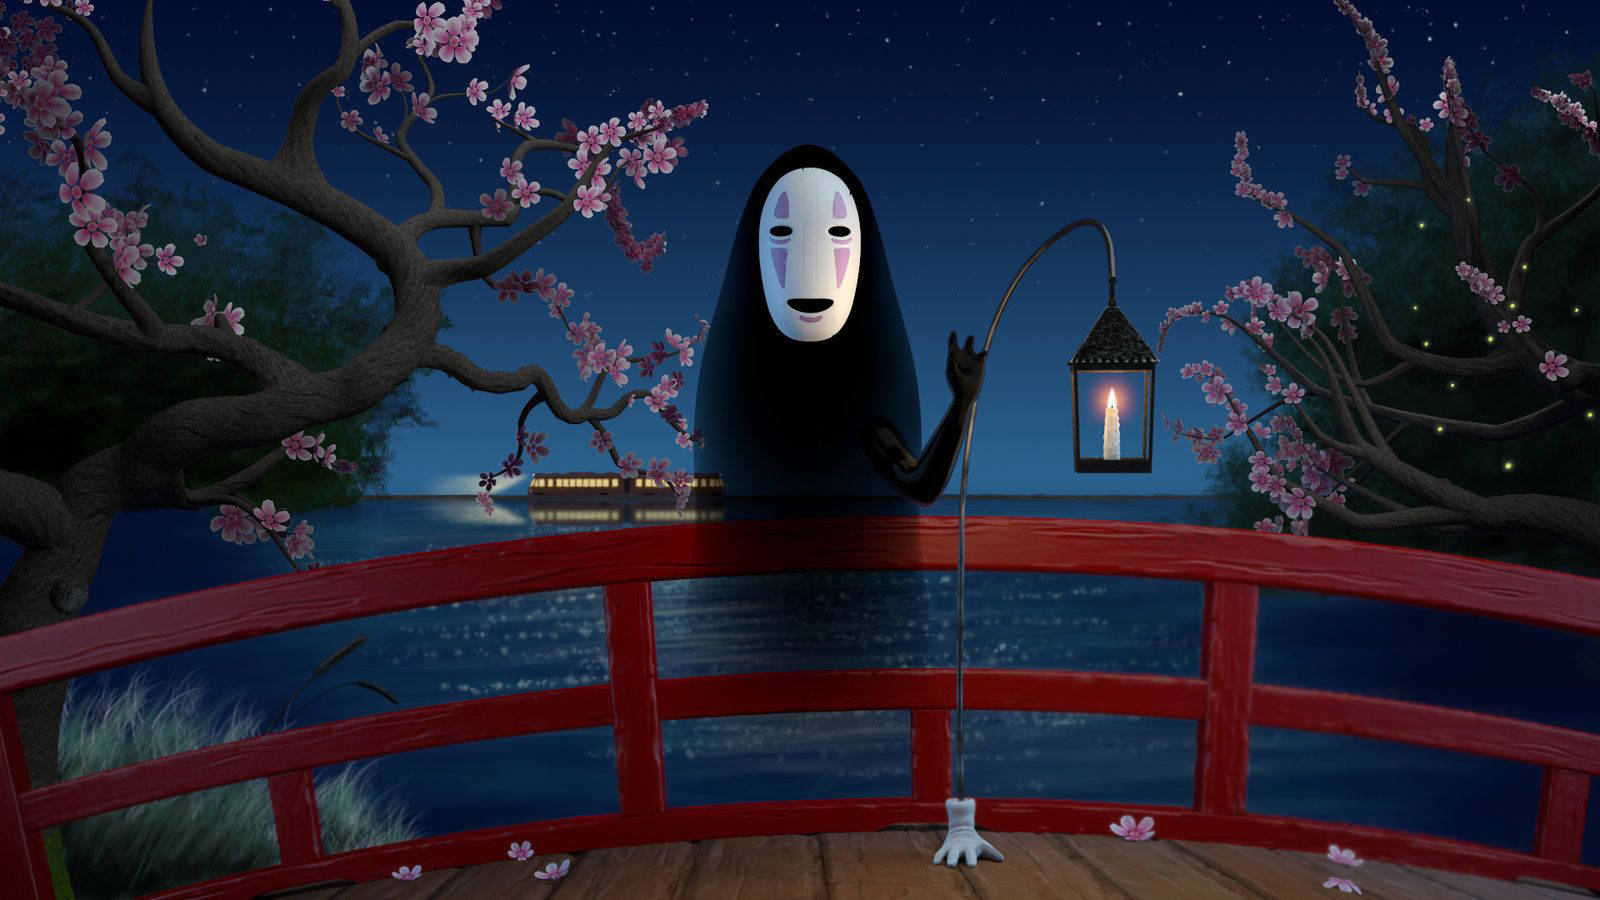 No-face With Hopping Lantern Background